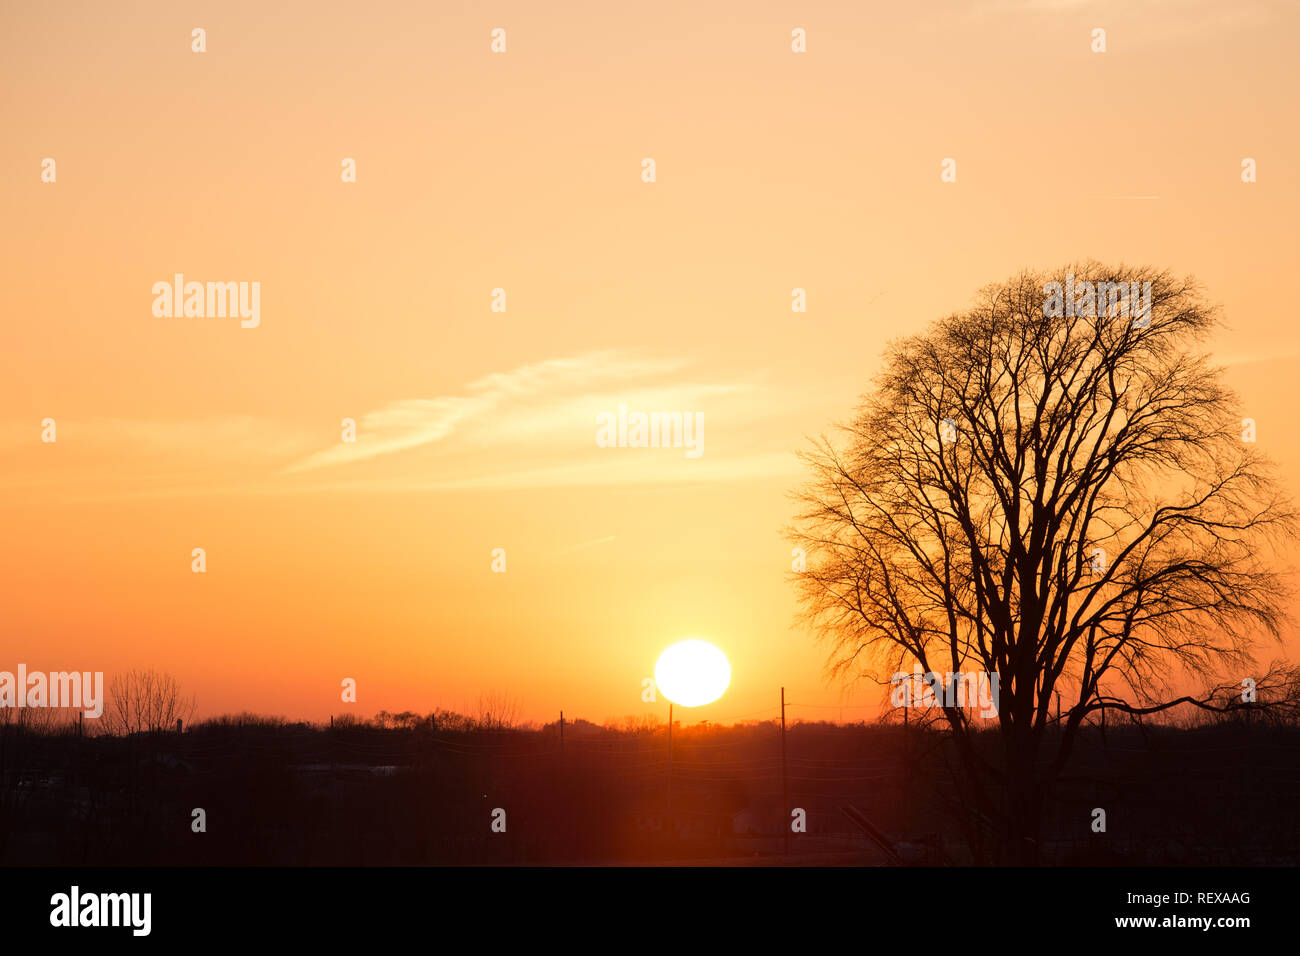 Sunset over a field with a lone bare tree Stock Photo